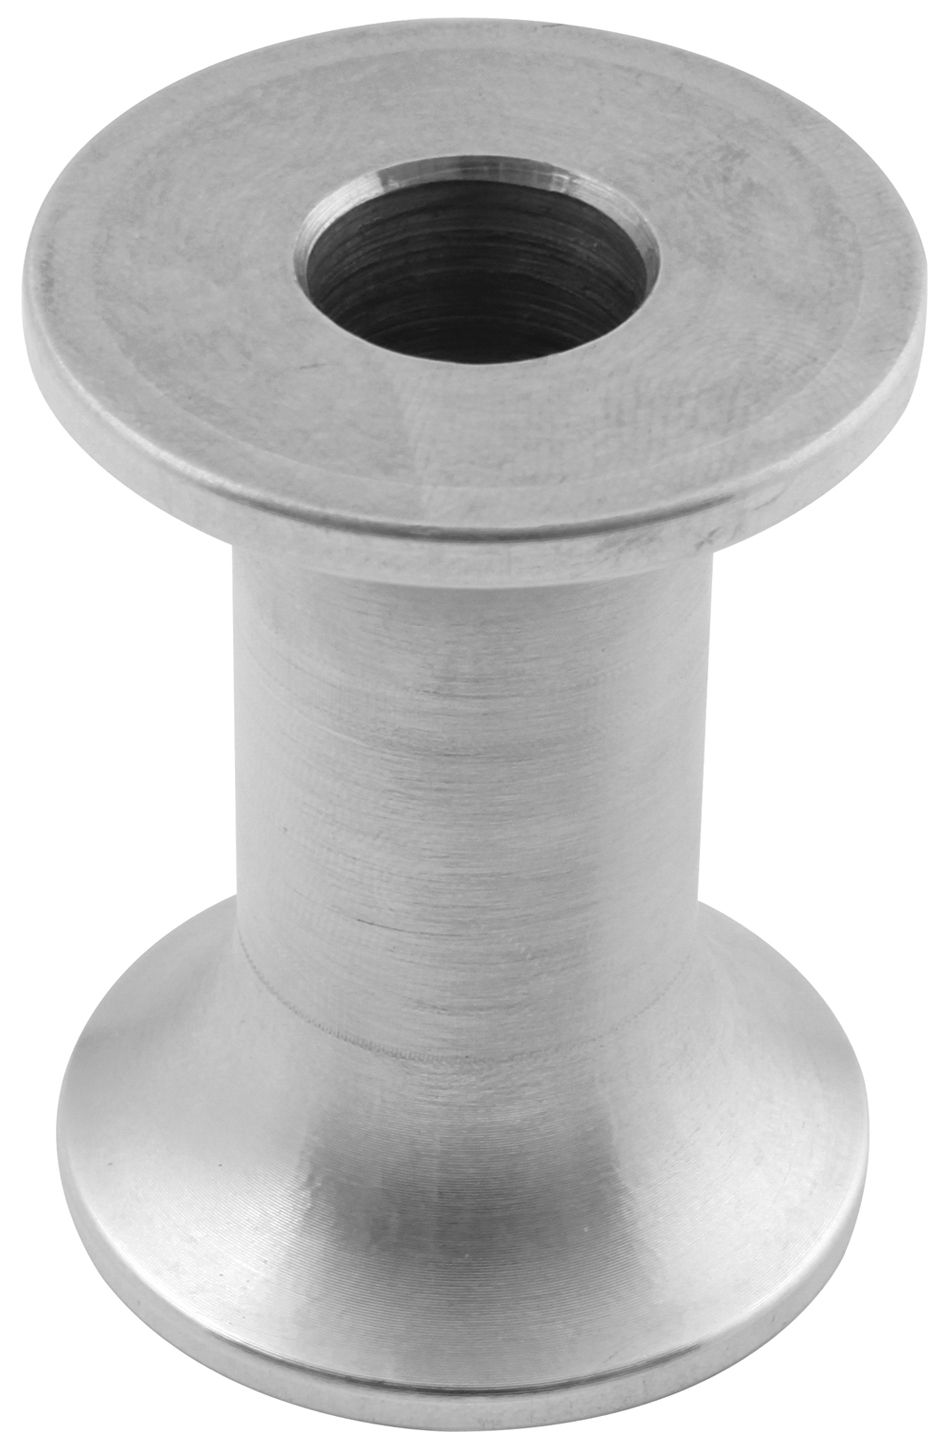 Allstar Performance 18624-10 Motor Mount Spacer, 2 in Tall, 1/2 in ID, 1-1/2 in OD, Aluminum, Natural, Set of 10